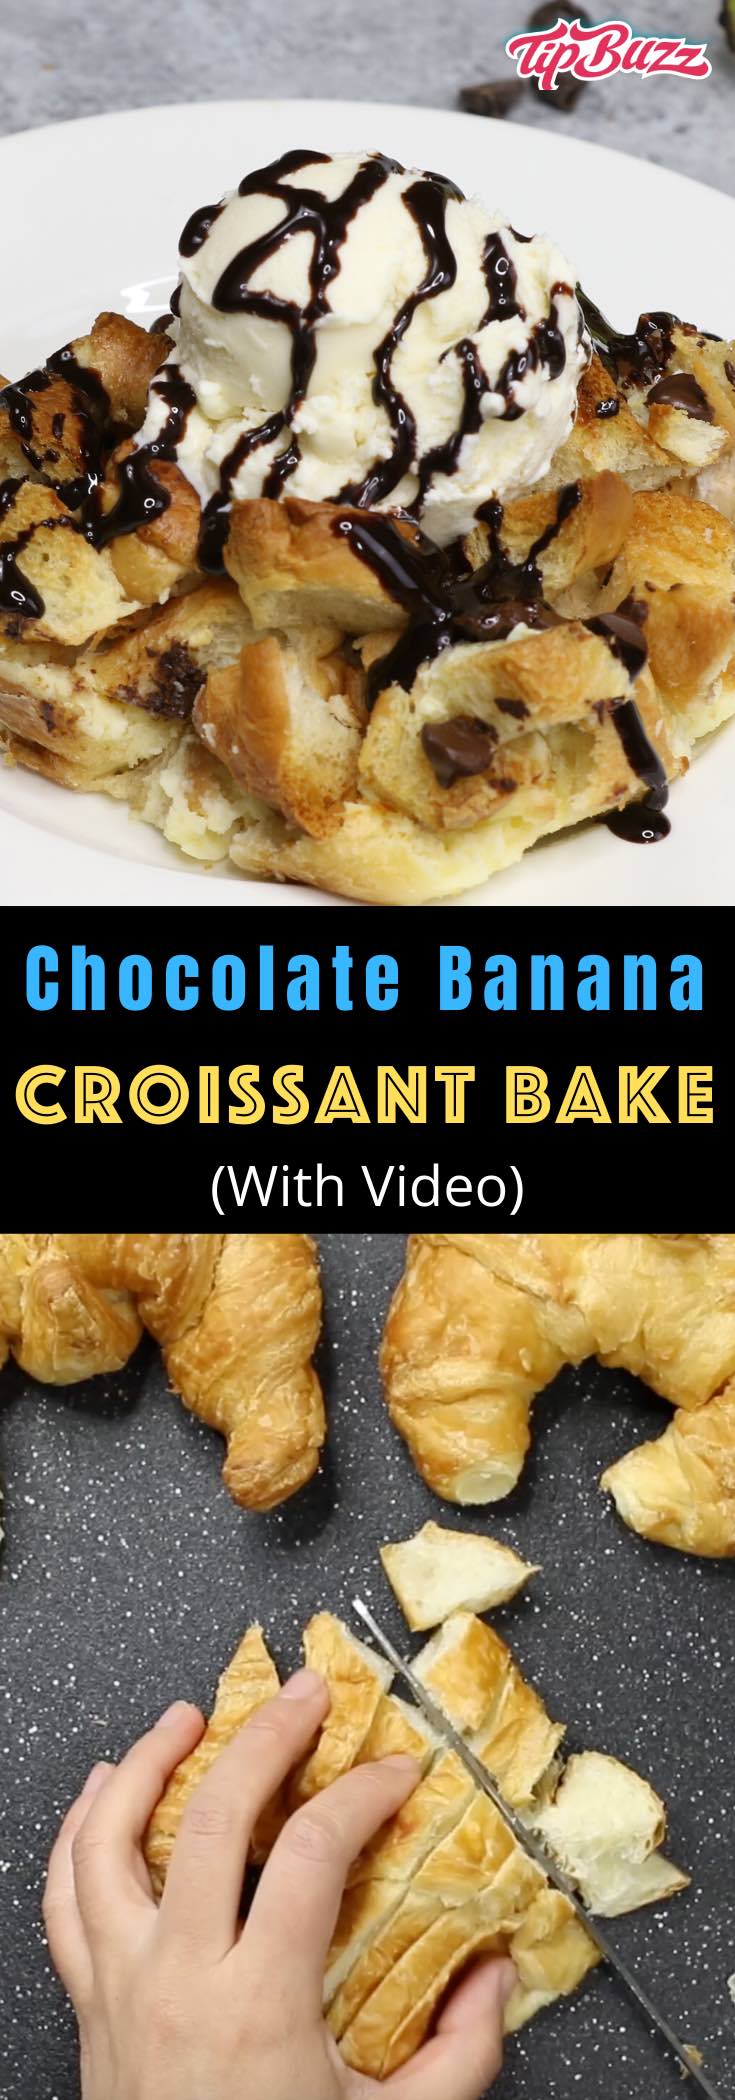 This Chocolate Banana Croissant Bake is a super-yummy variation on the beautiful chocolate banana theme... basically a croissant bread pudding with some chocolate chips and cheesecake mixed in. You could also call it total dessert satisfaction! #bananaBreadPudding